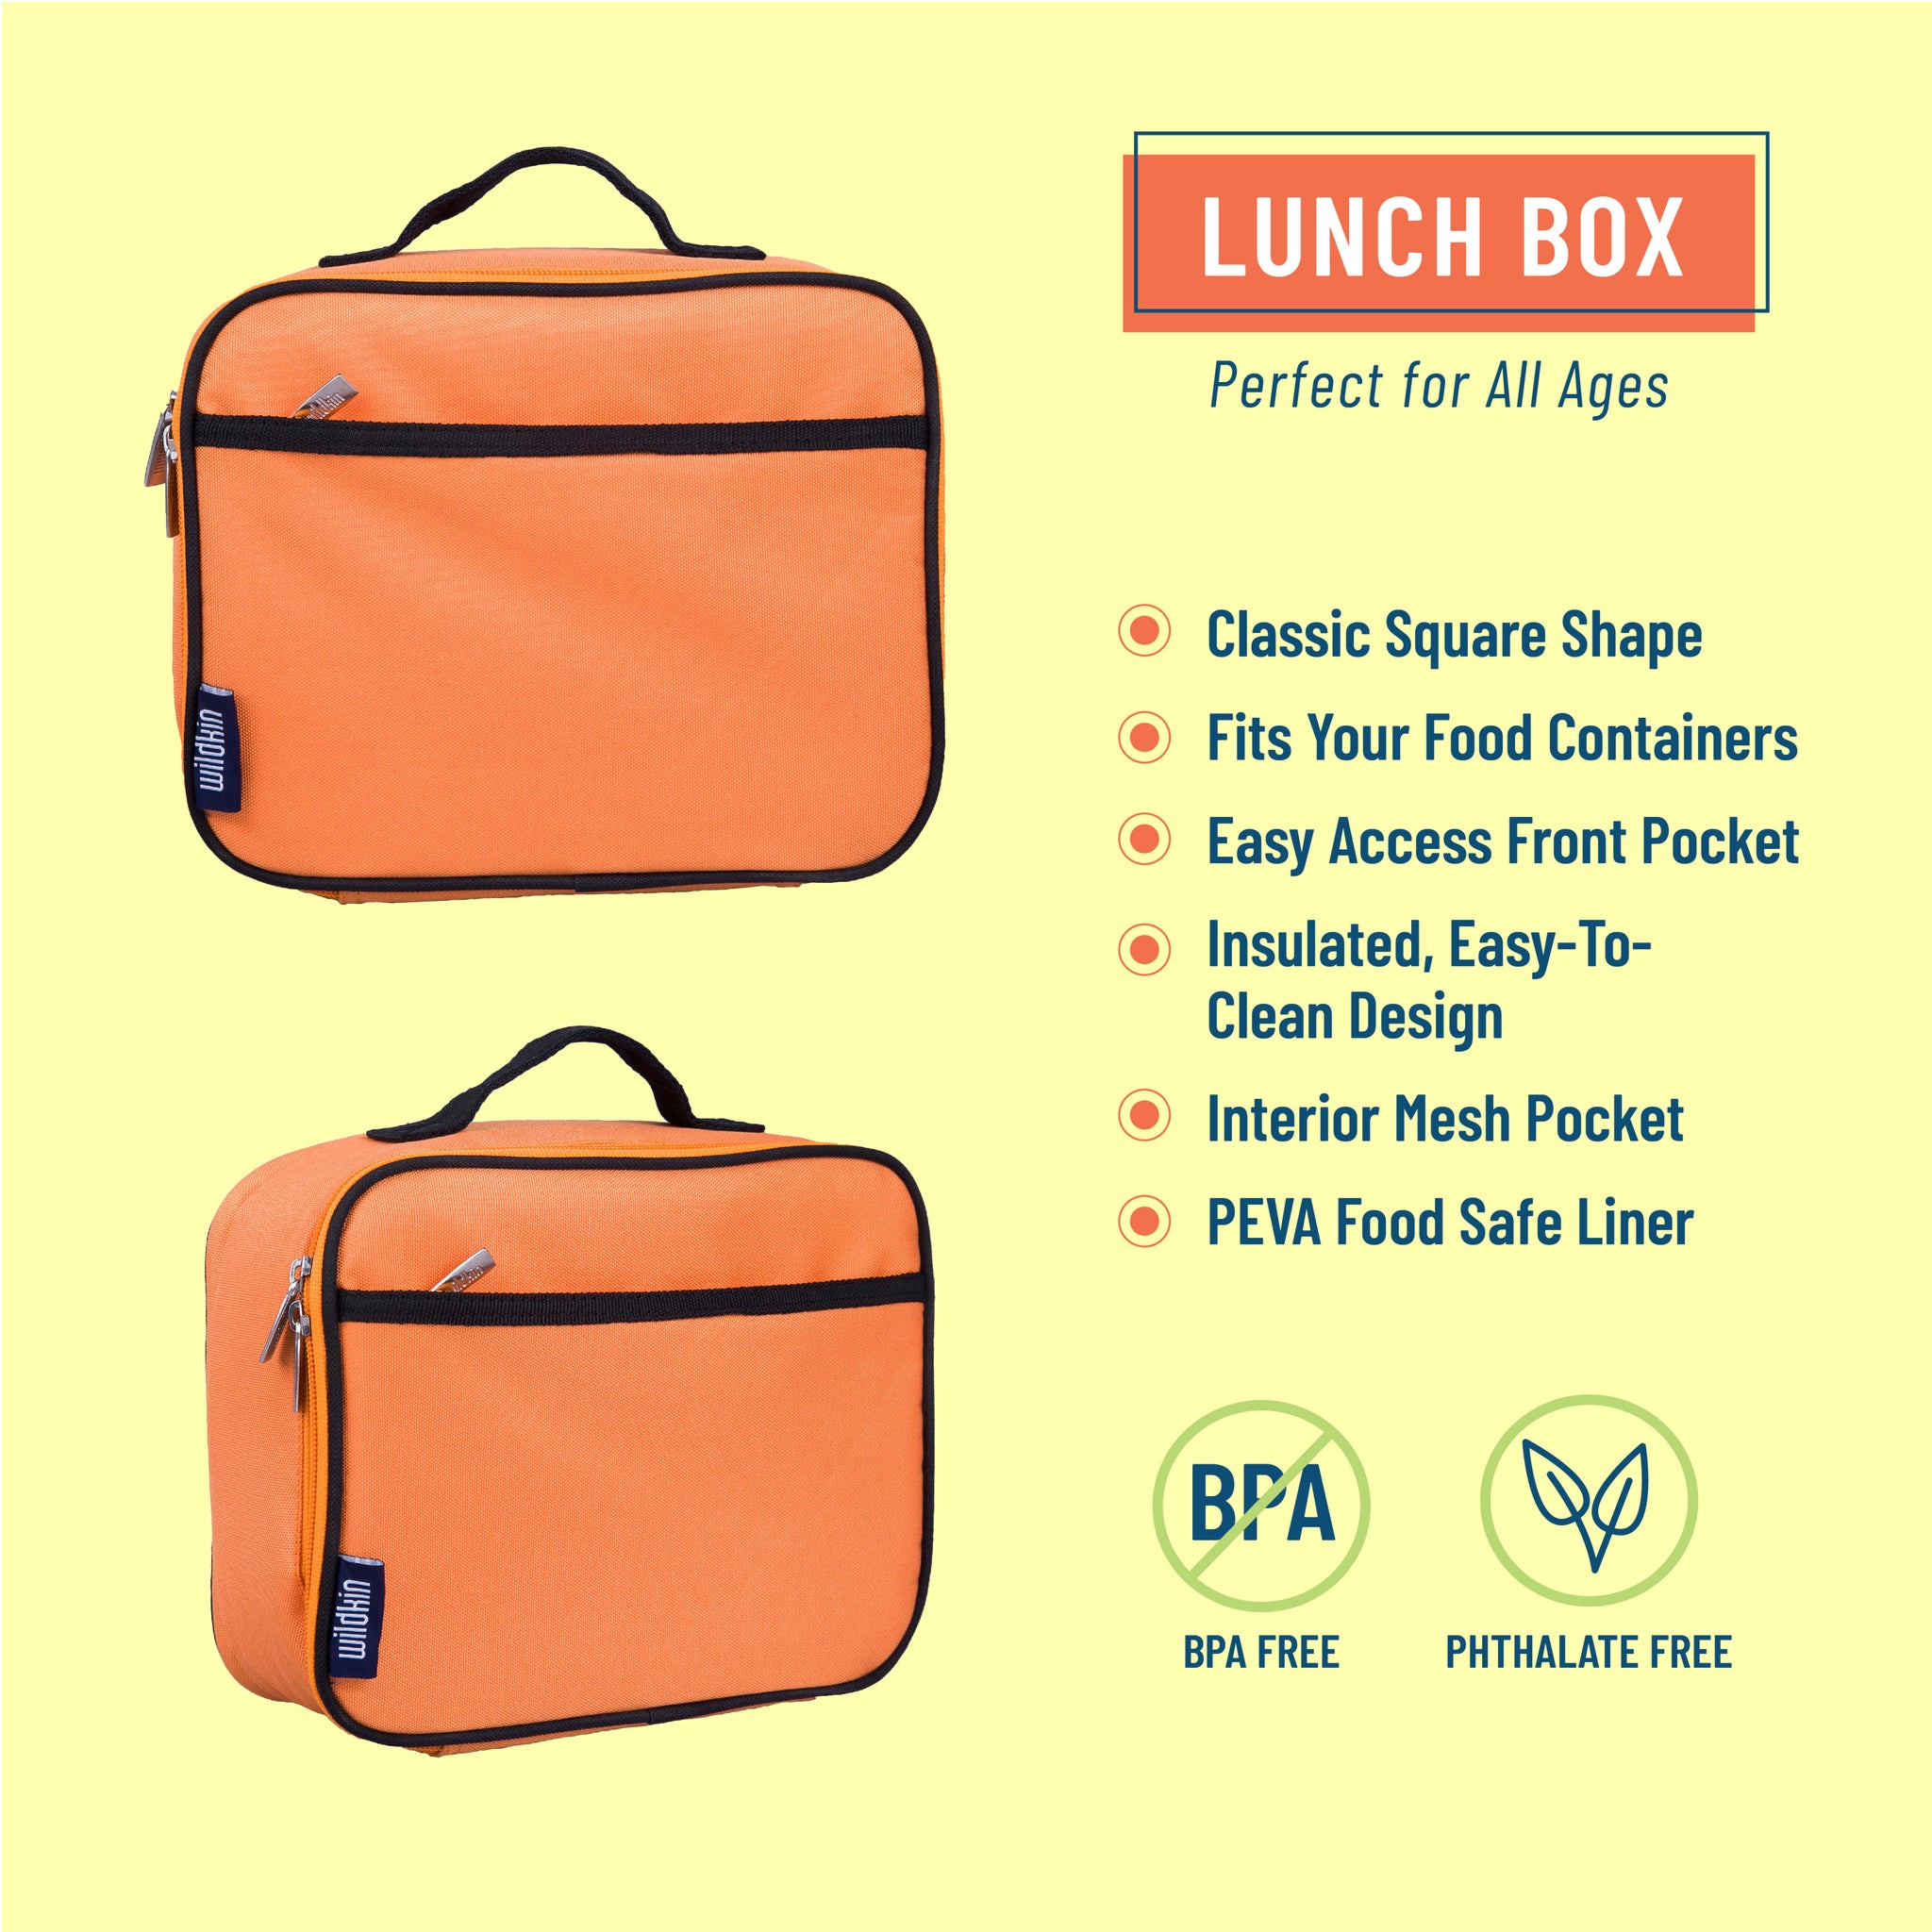 FOODSKIN FLEXIBLE LUNCHBOX  Cooking gadgets, Lunch box, Food